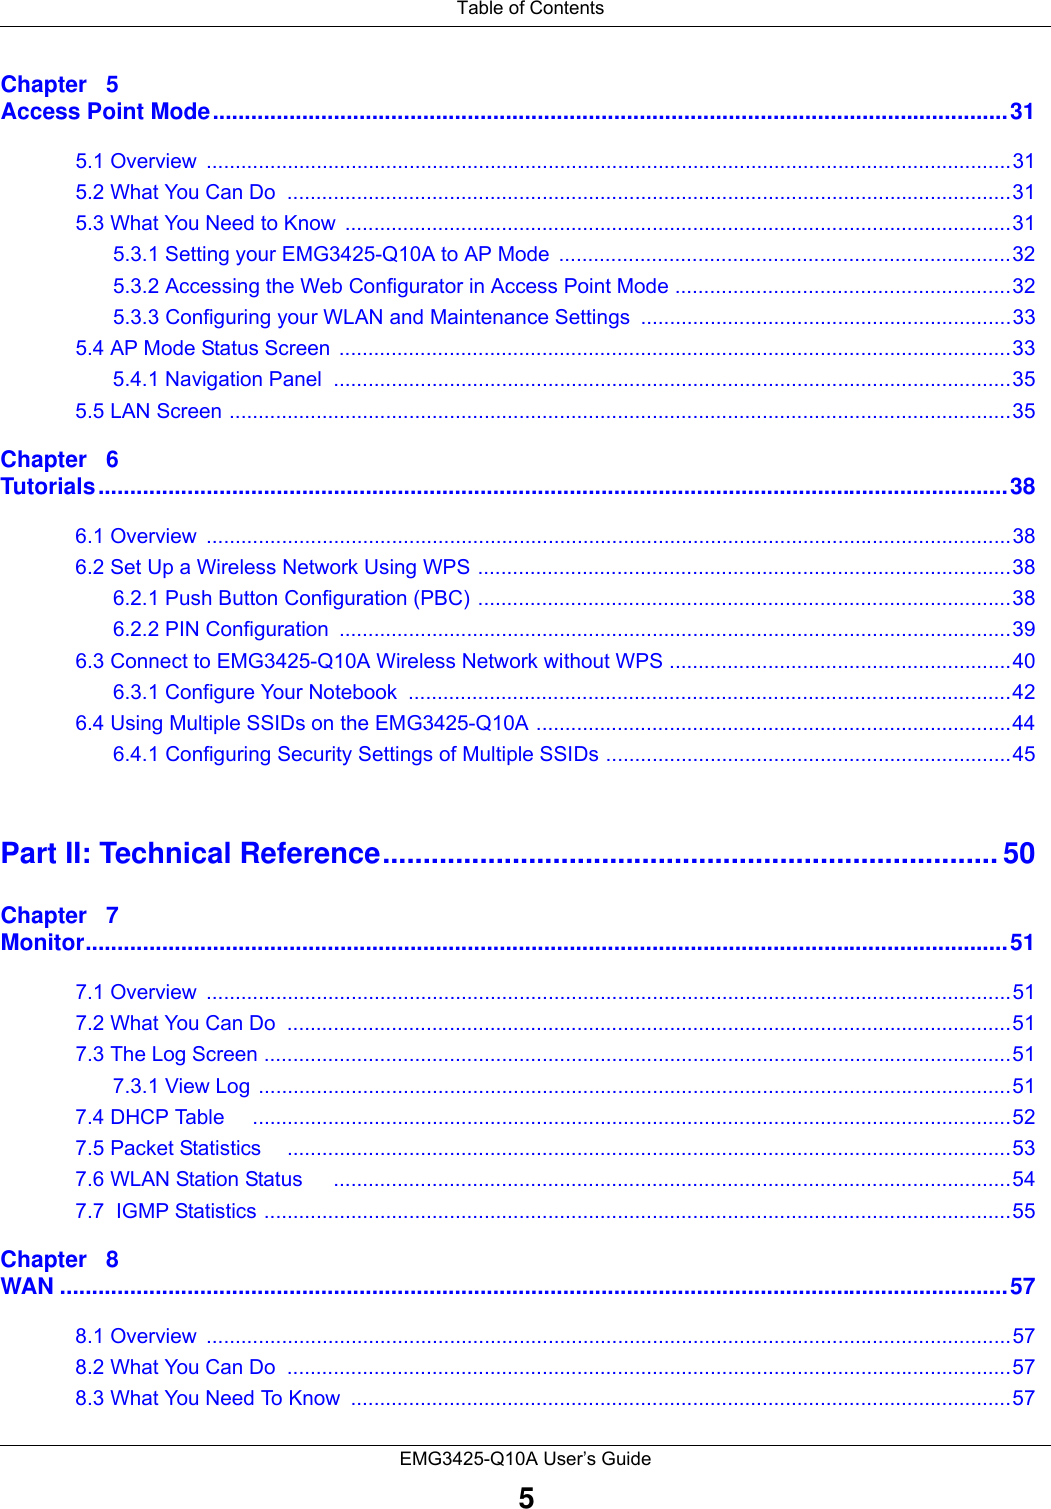  Table of ContentsEMG3425-Q10A User’s Guide5Chapter   5Access Point Mode.............................................................................................................................315.1 Overview  ...........................................................................................................................................315.2 What You Can Do  .............................................................................................................................315.3 What You Need to Know  ...................................................................................................................315.3.1 Setting your EMG3425-Q10A to AP Mode  ..............................................................................325.3.2 Accessing the Web Configurator in Access Point Mode ..........................................................325.3.3 Configuring your WLAN and Maintenance Settings ................................................................335.4 AP Mode Status Screen  ....................................................................................................................335.4.1 Navigation Panel  .....................................................................................................................355.5 LAN Screen .......................................................................................................................................35Chapter   6Tutorials...............................................................................................................................................386.1 Overview  ...........................................................................................................................................386.2 Set Up a Wireless Network Using WPS ............................................................................................386.2.1 Push Button Configuration (PBC) ............................................................................................386.2.2 PIN Configuration  ....................................................................................................................396.3 Connect to EMG3425-Q10A Wireless Network without WPS ...........................................................406.3.1 Configure Your Notebook  ........................................................................................................426.4 Using Multiple SSIDs on the EMG3425-Q10A ..................................................................................446.4.1 Configuring Security Settings of Multiple SSIDs ......................................................................45Part II: Technical Reference............................................................................ 50Chapter   7Monitor.................................................................................................................................................517.1 Overview  ...........................................................................................................................................517.2 What You Can Do  .............................................................................................................................517.3 The Log Screen .................................................................................................................................517.3.1 View Log ..................................................................................................................................517.4 DHCP Table     ...................................................................................................................................527.5 Packet Statistics     .............................................................................................................................537.6 WLAN Station Status     .....................................................................................................................547.7  IGMP Statistics .................................................................................................................................55Chapter   8WAN .....................................................................................................................................................578.1 Overview  ...........................................................................................................................................578.2 What You Can Do  .............................................................................................................................578.3 What You Need To Know  ..................................................................................................................57